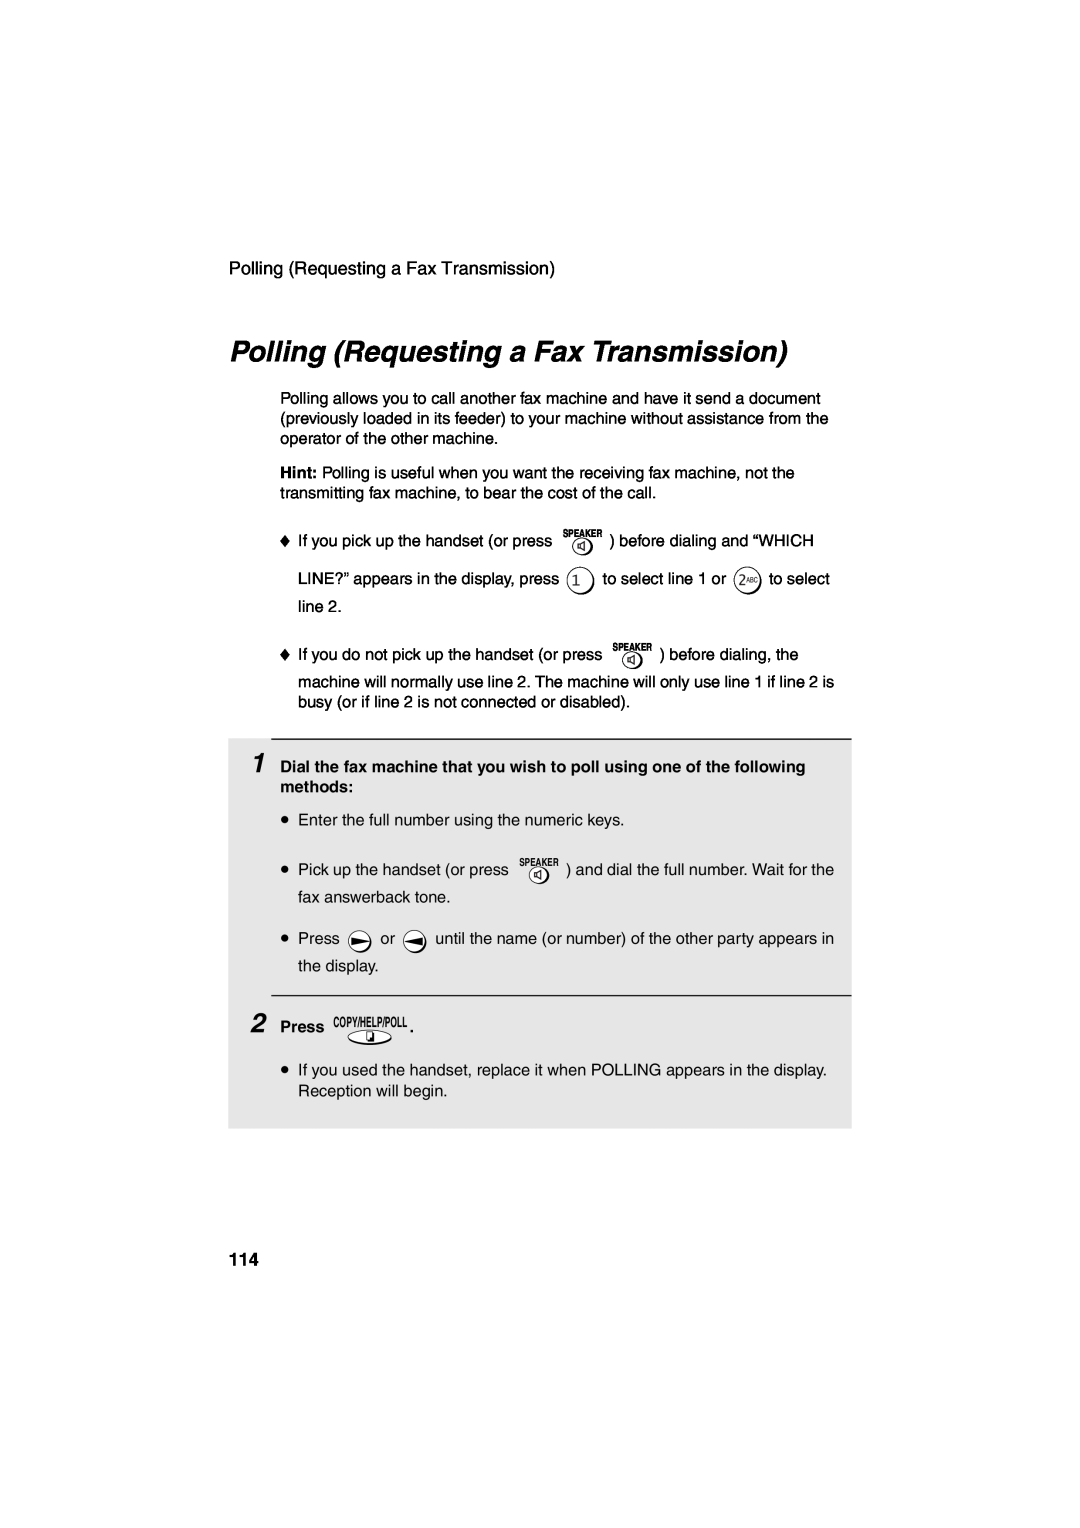 Sharp UX-CD600 operation manual Polling Requesting a Fax Transmission 